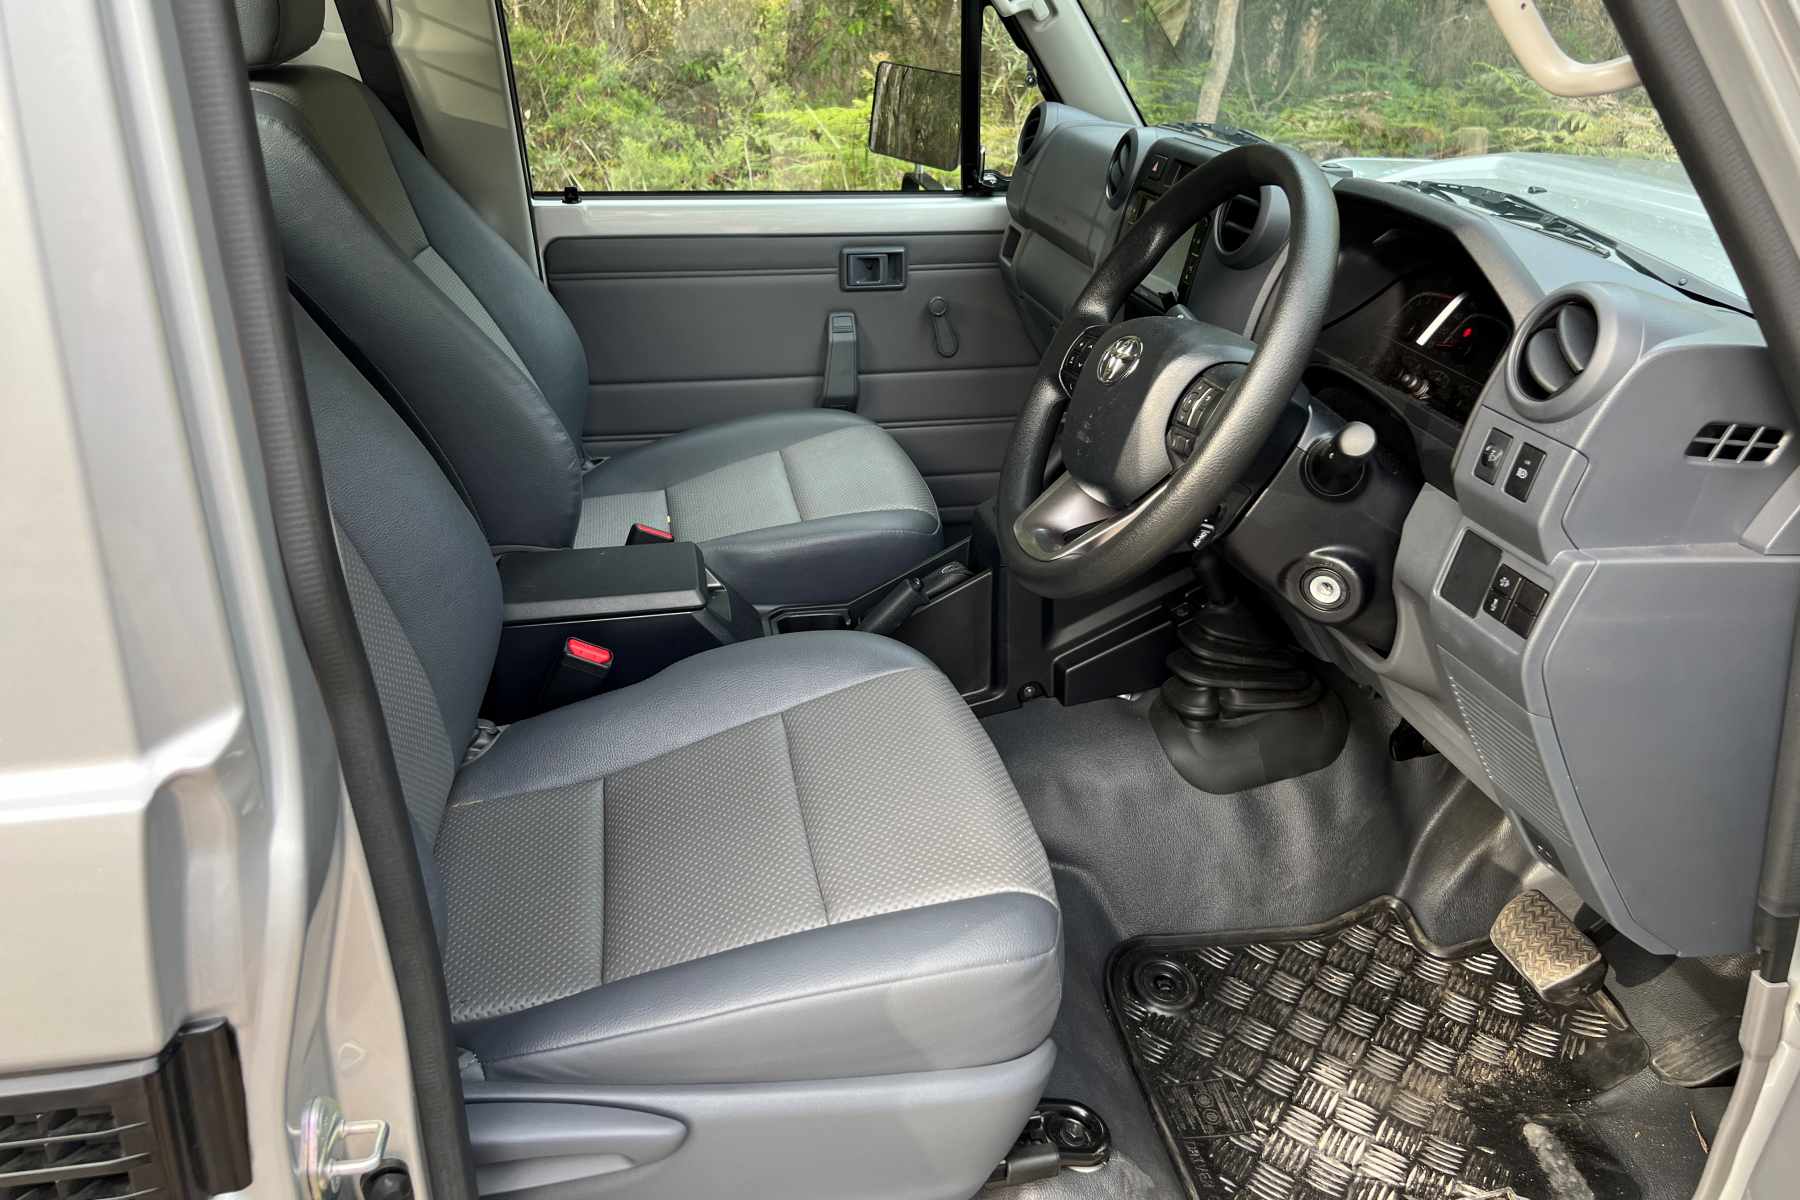 Toyota LandCruiser single cab chassis Ute front seats